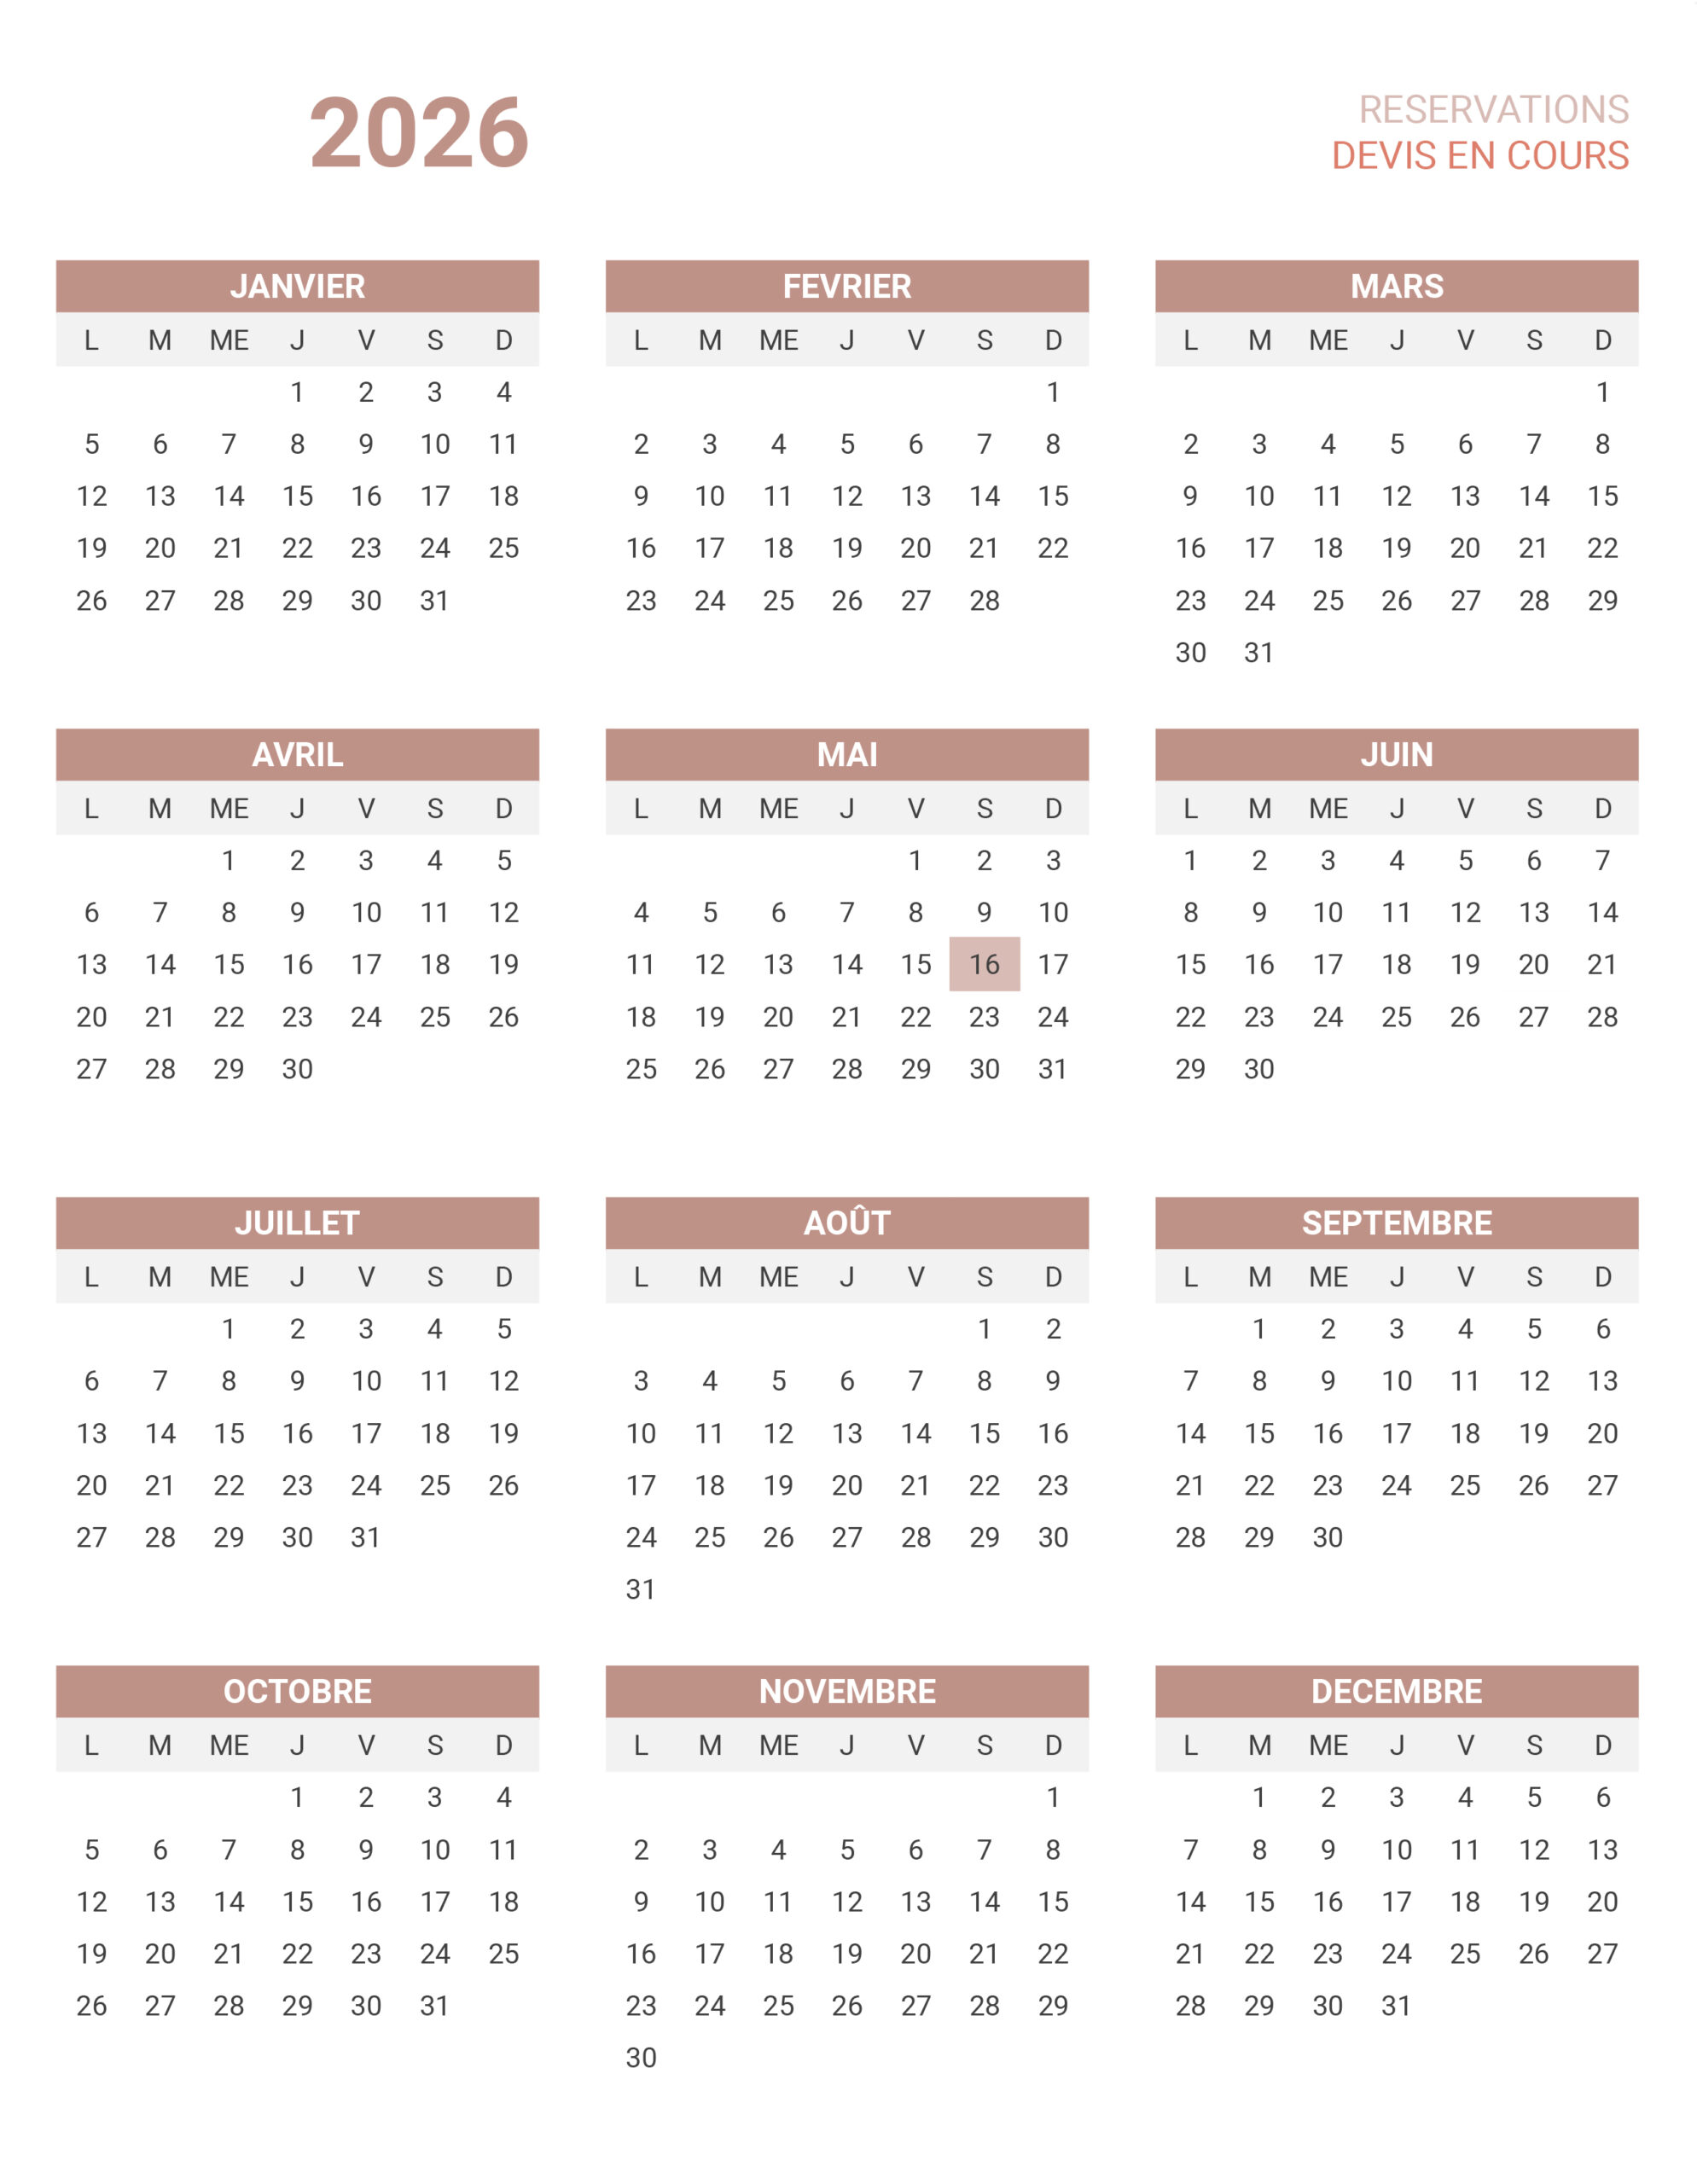 CALENDRIER_2026_COMPLET_1